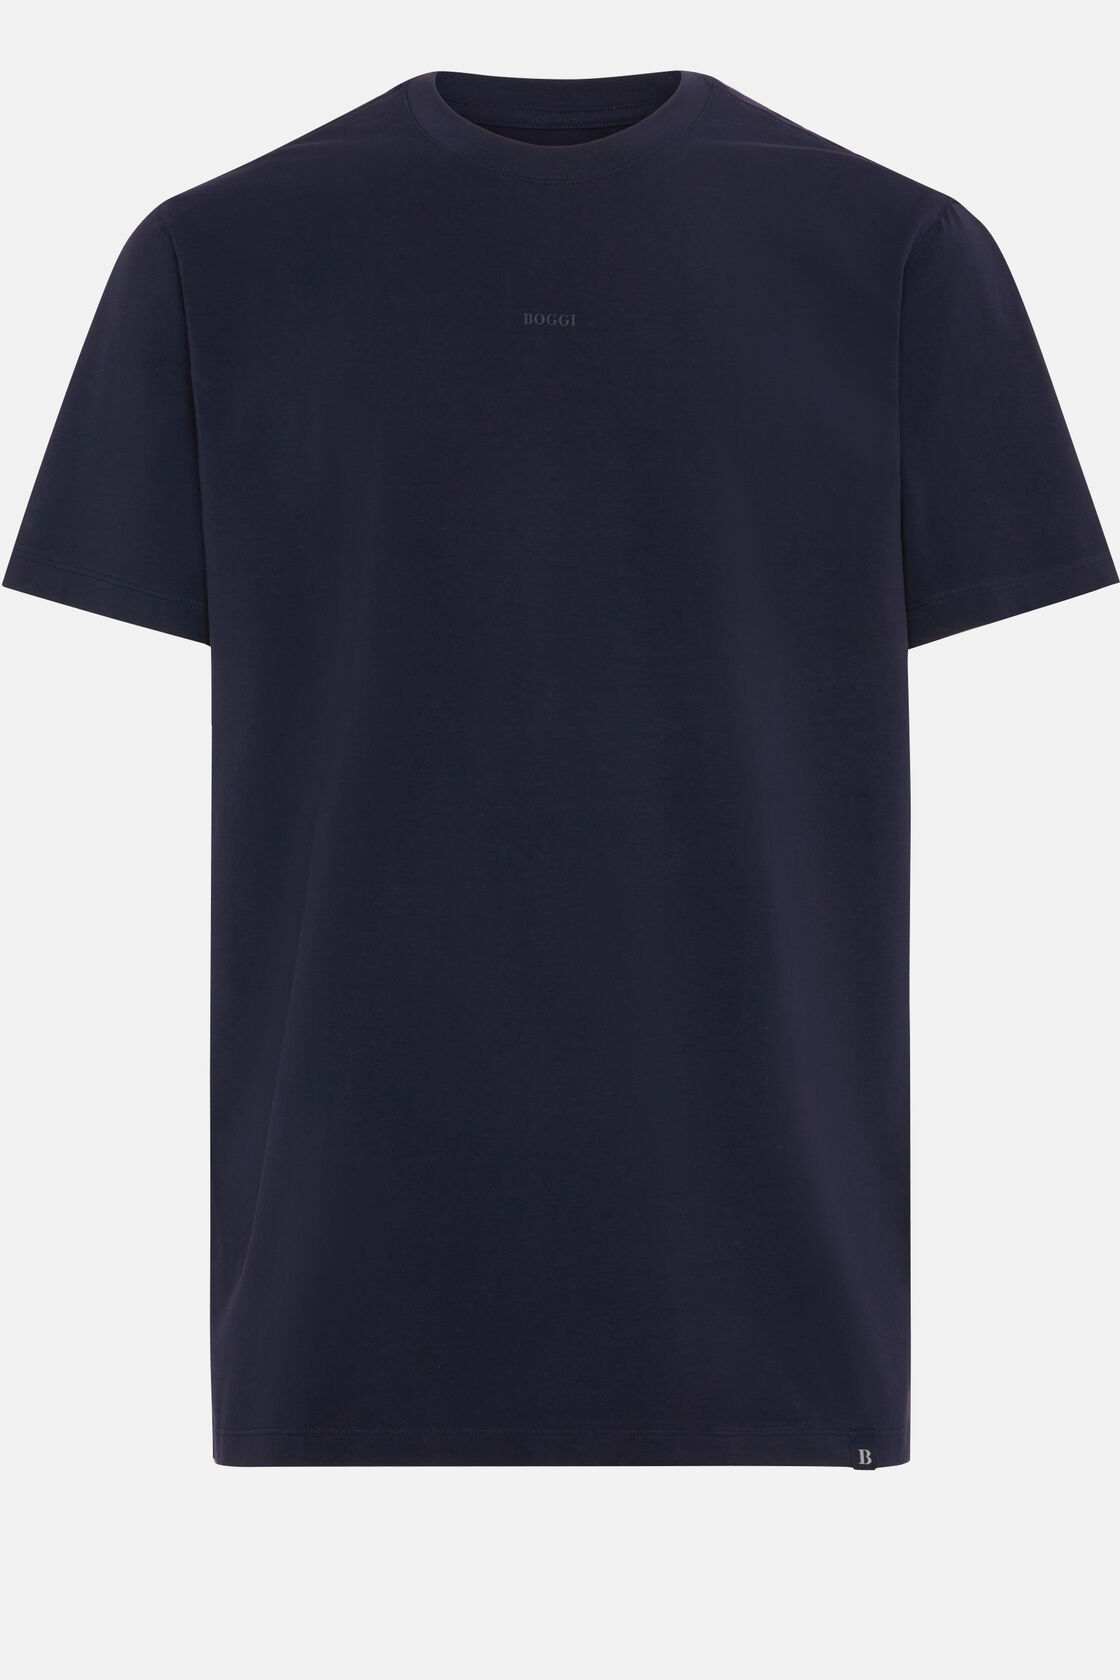 T-Shirt In Stretch Supima Cotton, Navy blue, hi-res